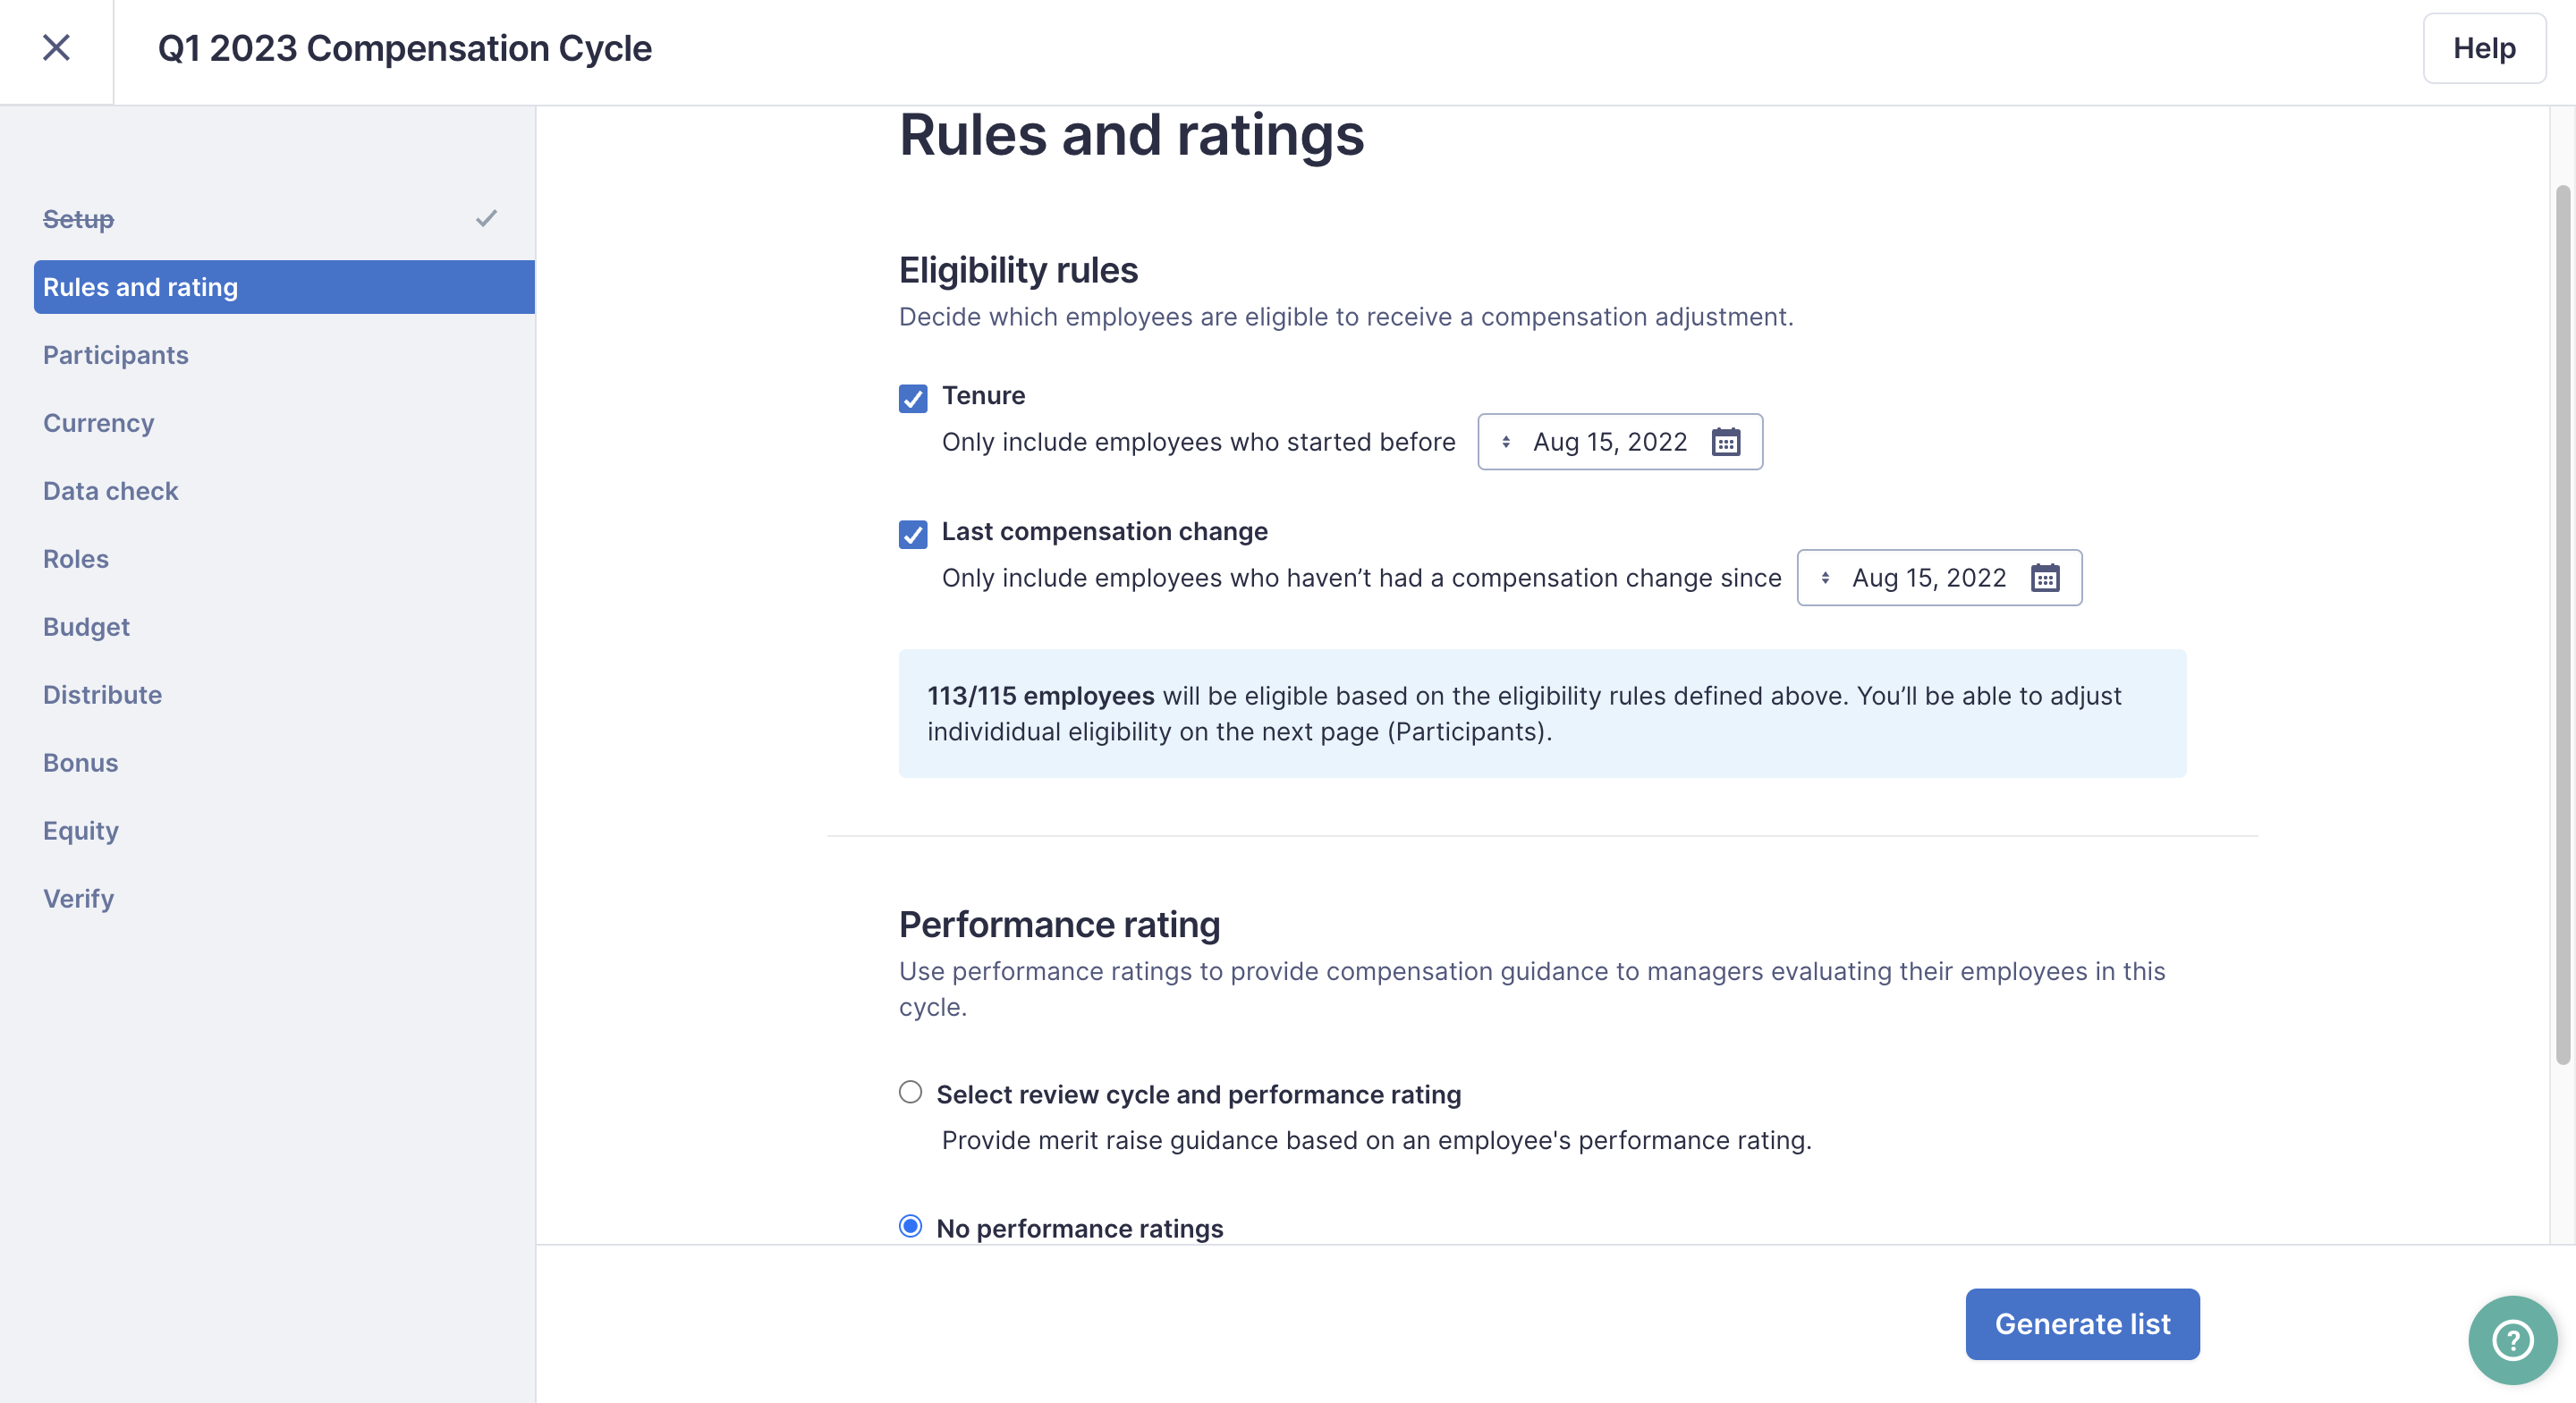 Compensation cycle editor open to the Rules and Ratings page